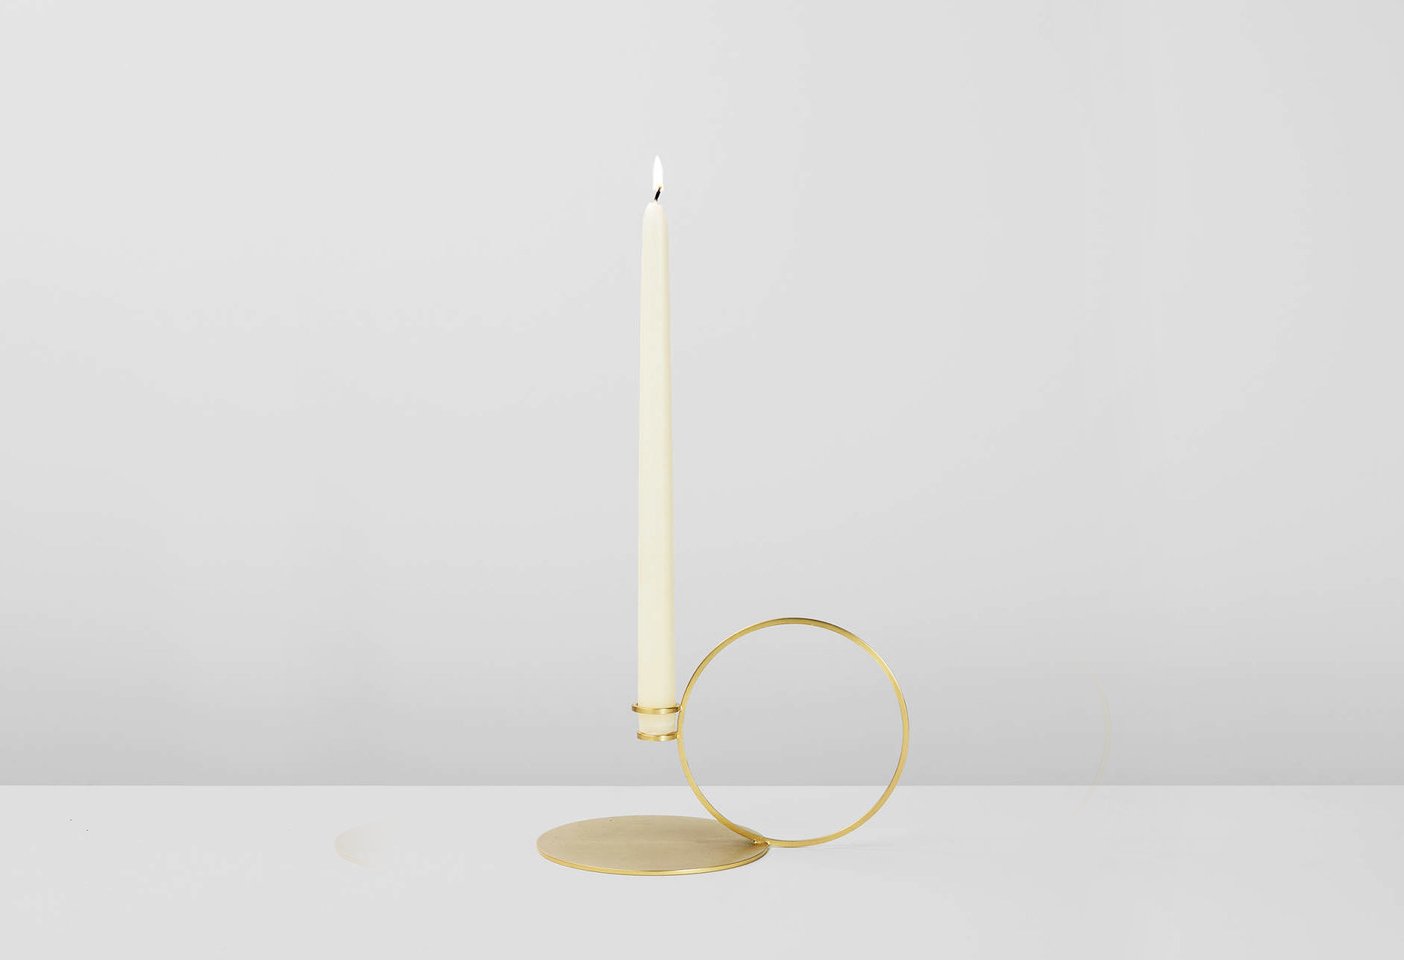 The Bulga lamp, meaning candlestick, is the second piece in the series designed by Formafantasma for Roll & Hill in Brooklyn, New York. Photo c/o Roll & Hill.